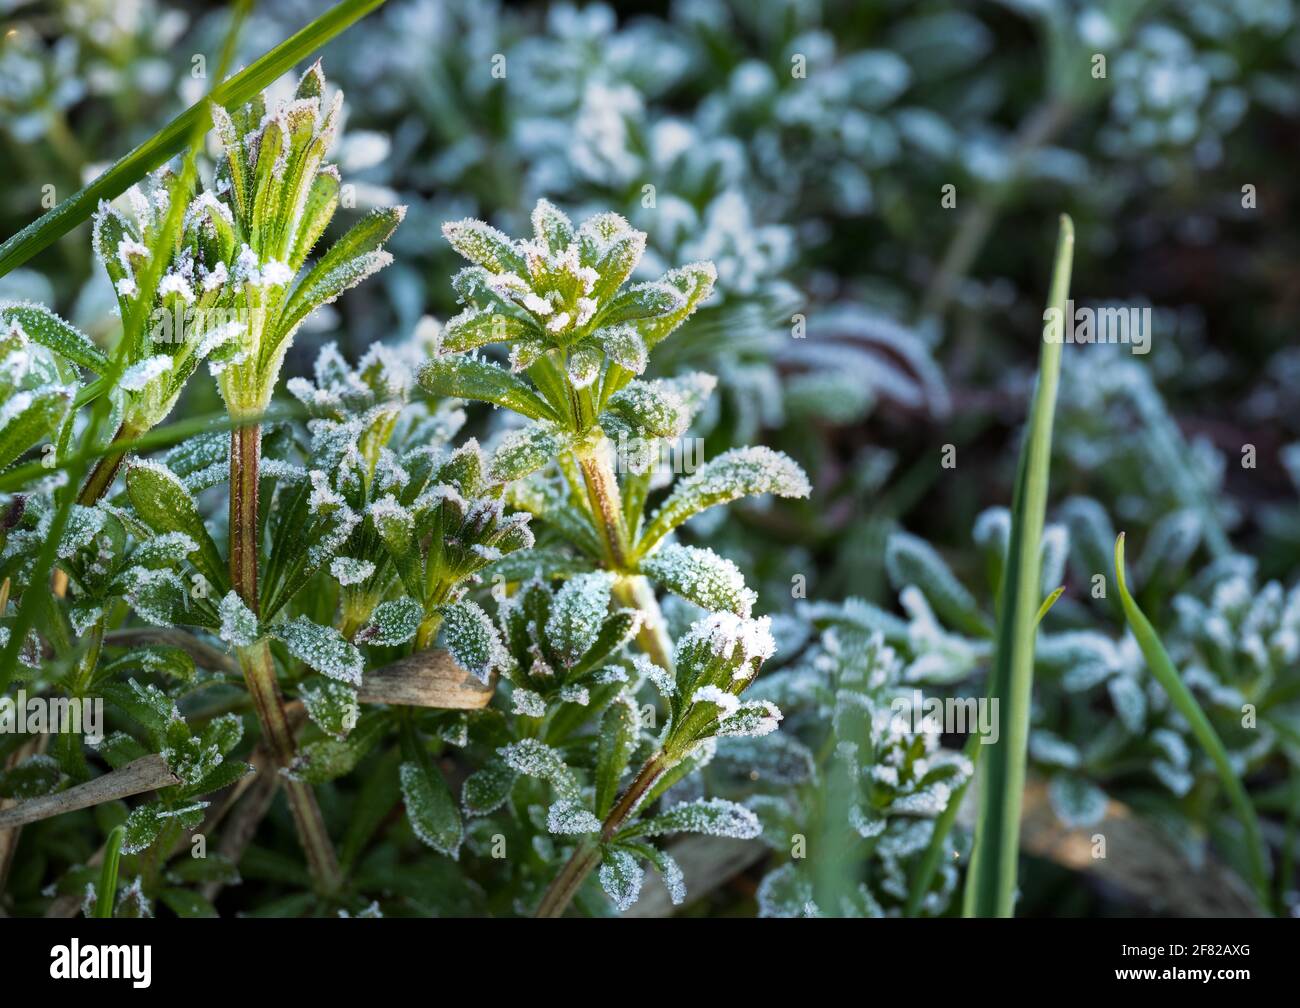 Plants with frozen frost. Beautiful abstract frozen microcosmos pattern. Freezing weather frost action in nature. Floral backdrop. Stock Photo